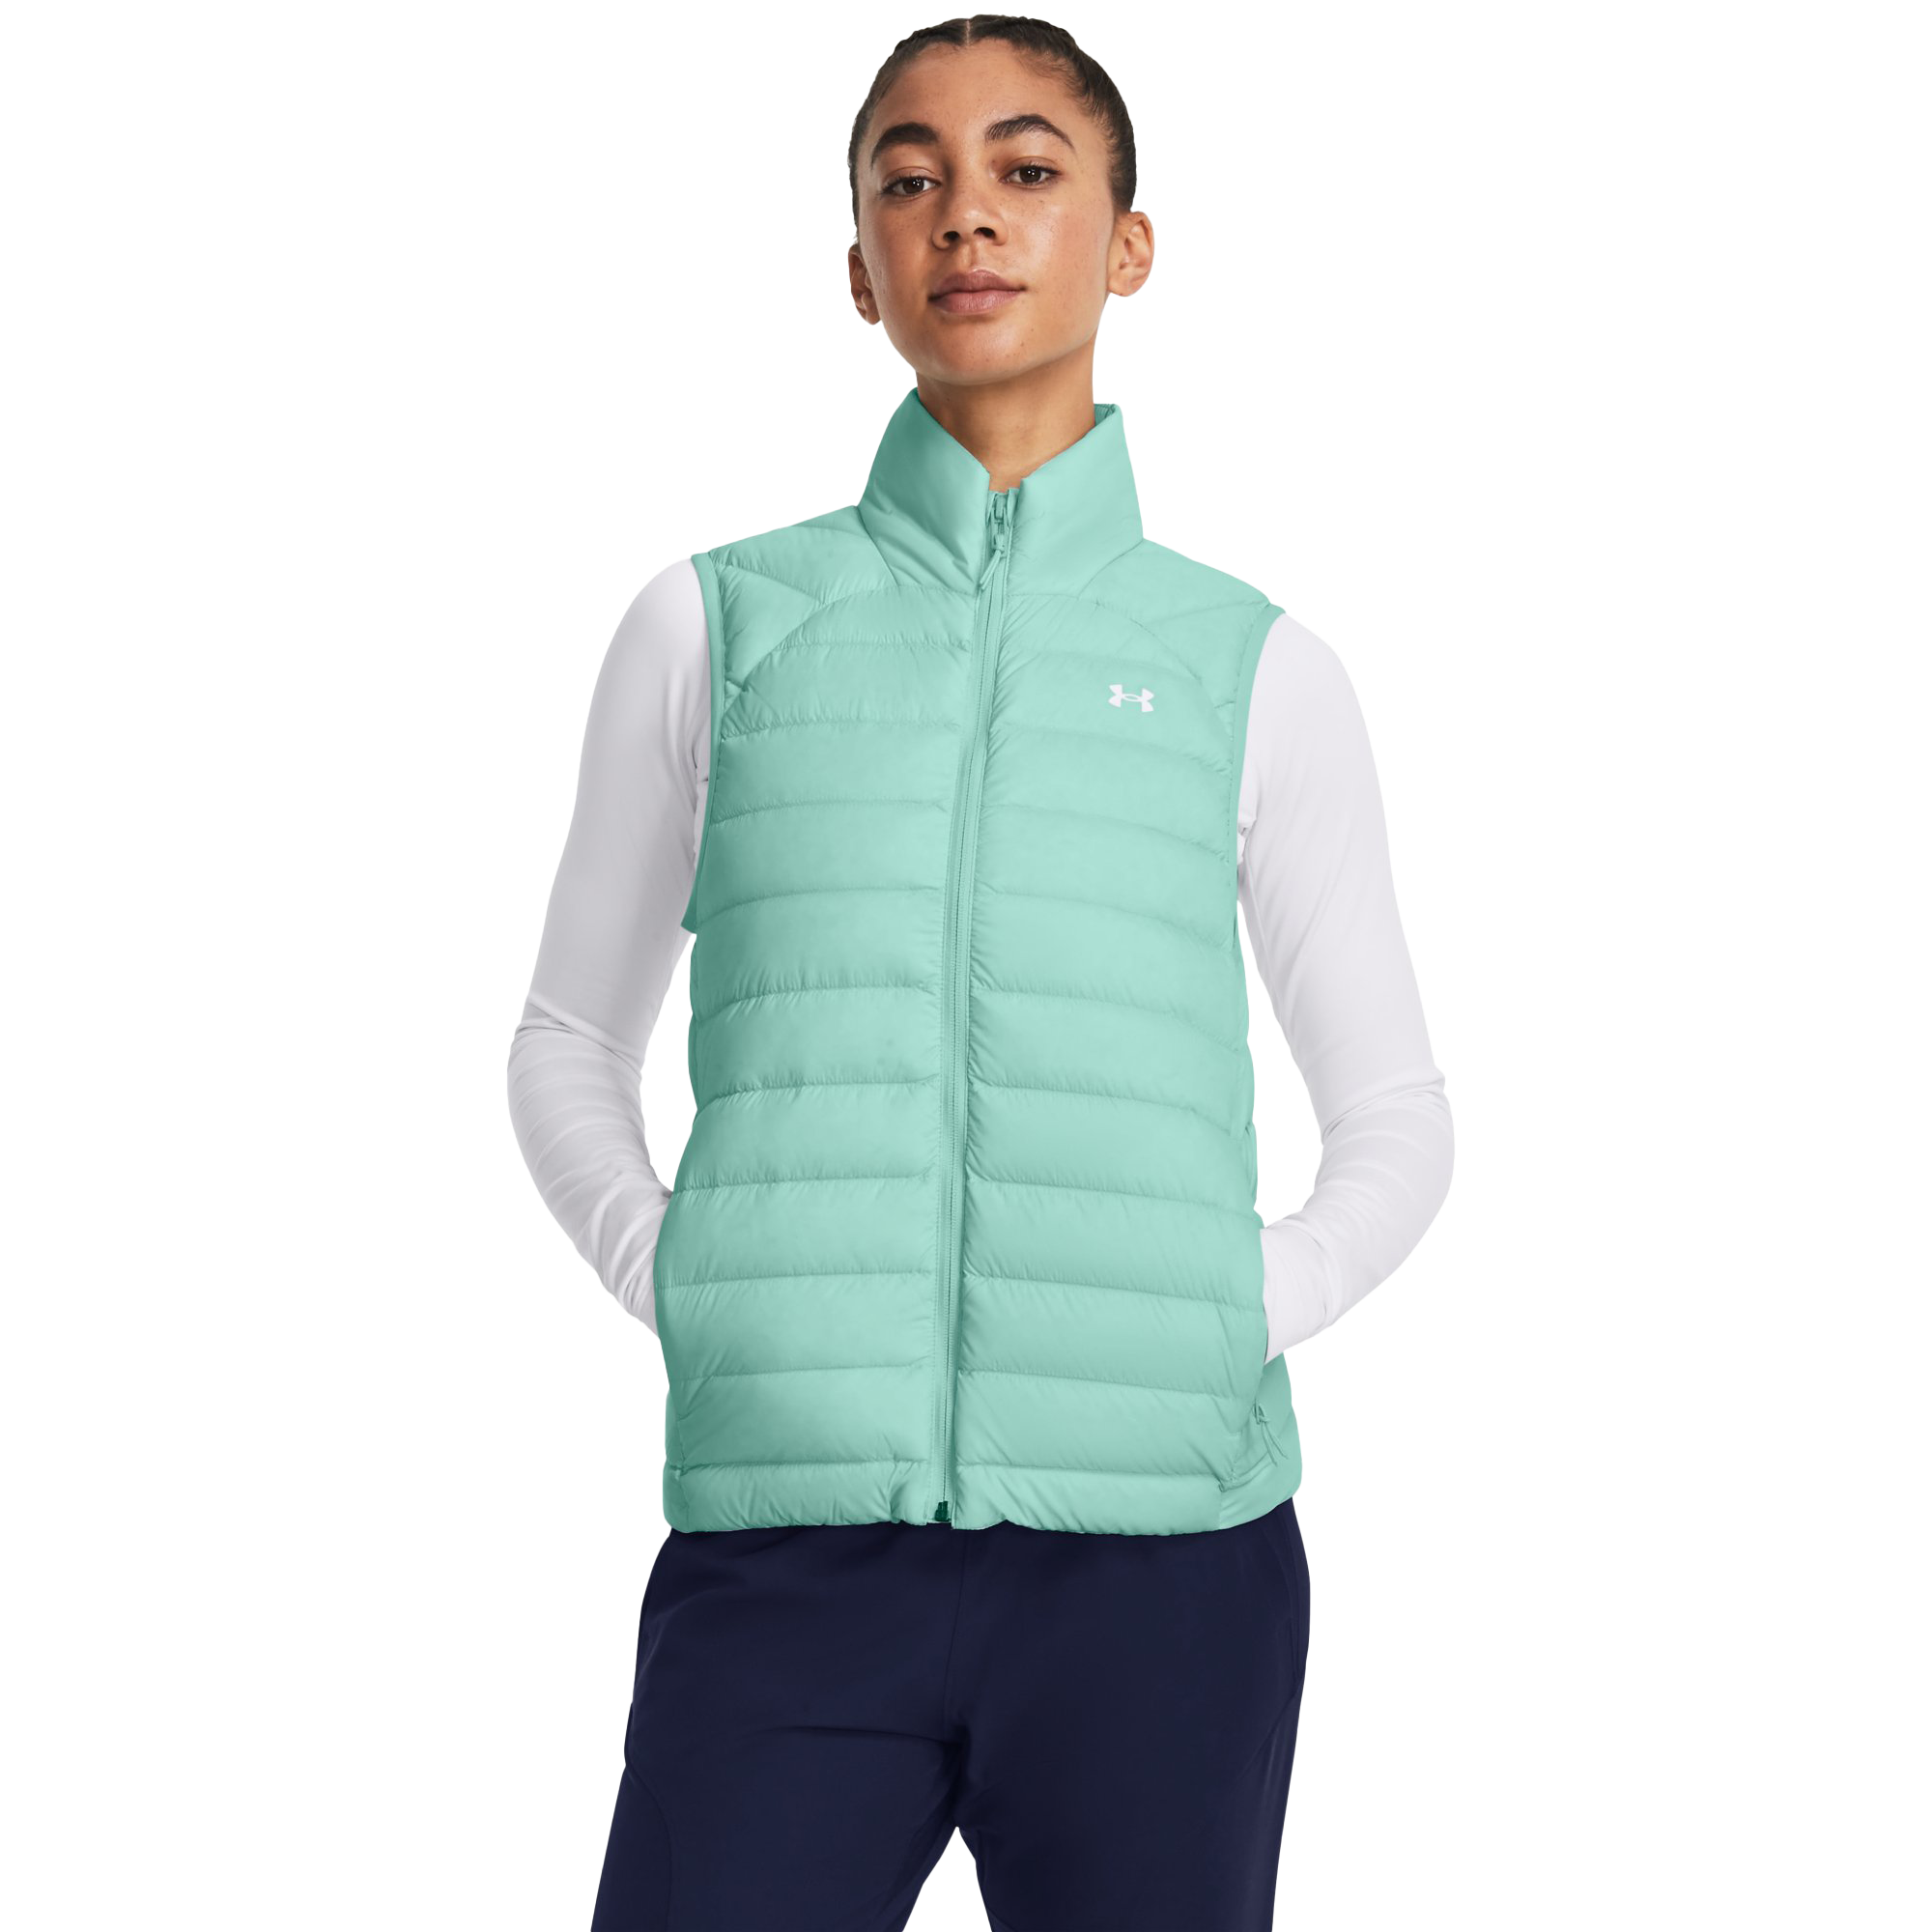 Under Armour Storm Armour Down 2.0 Vest for Ladies - Neo Turquoise/White - XL